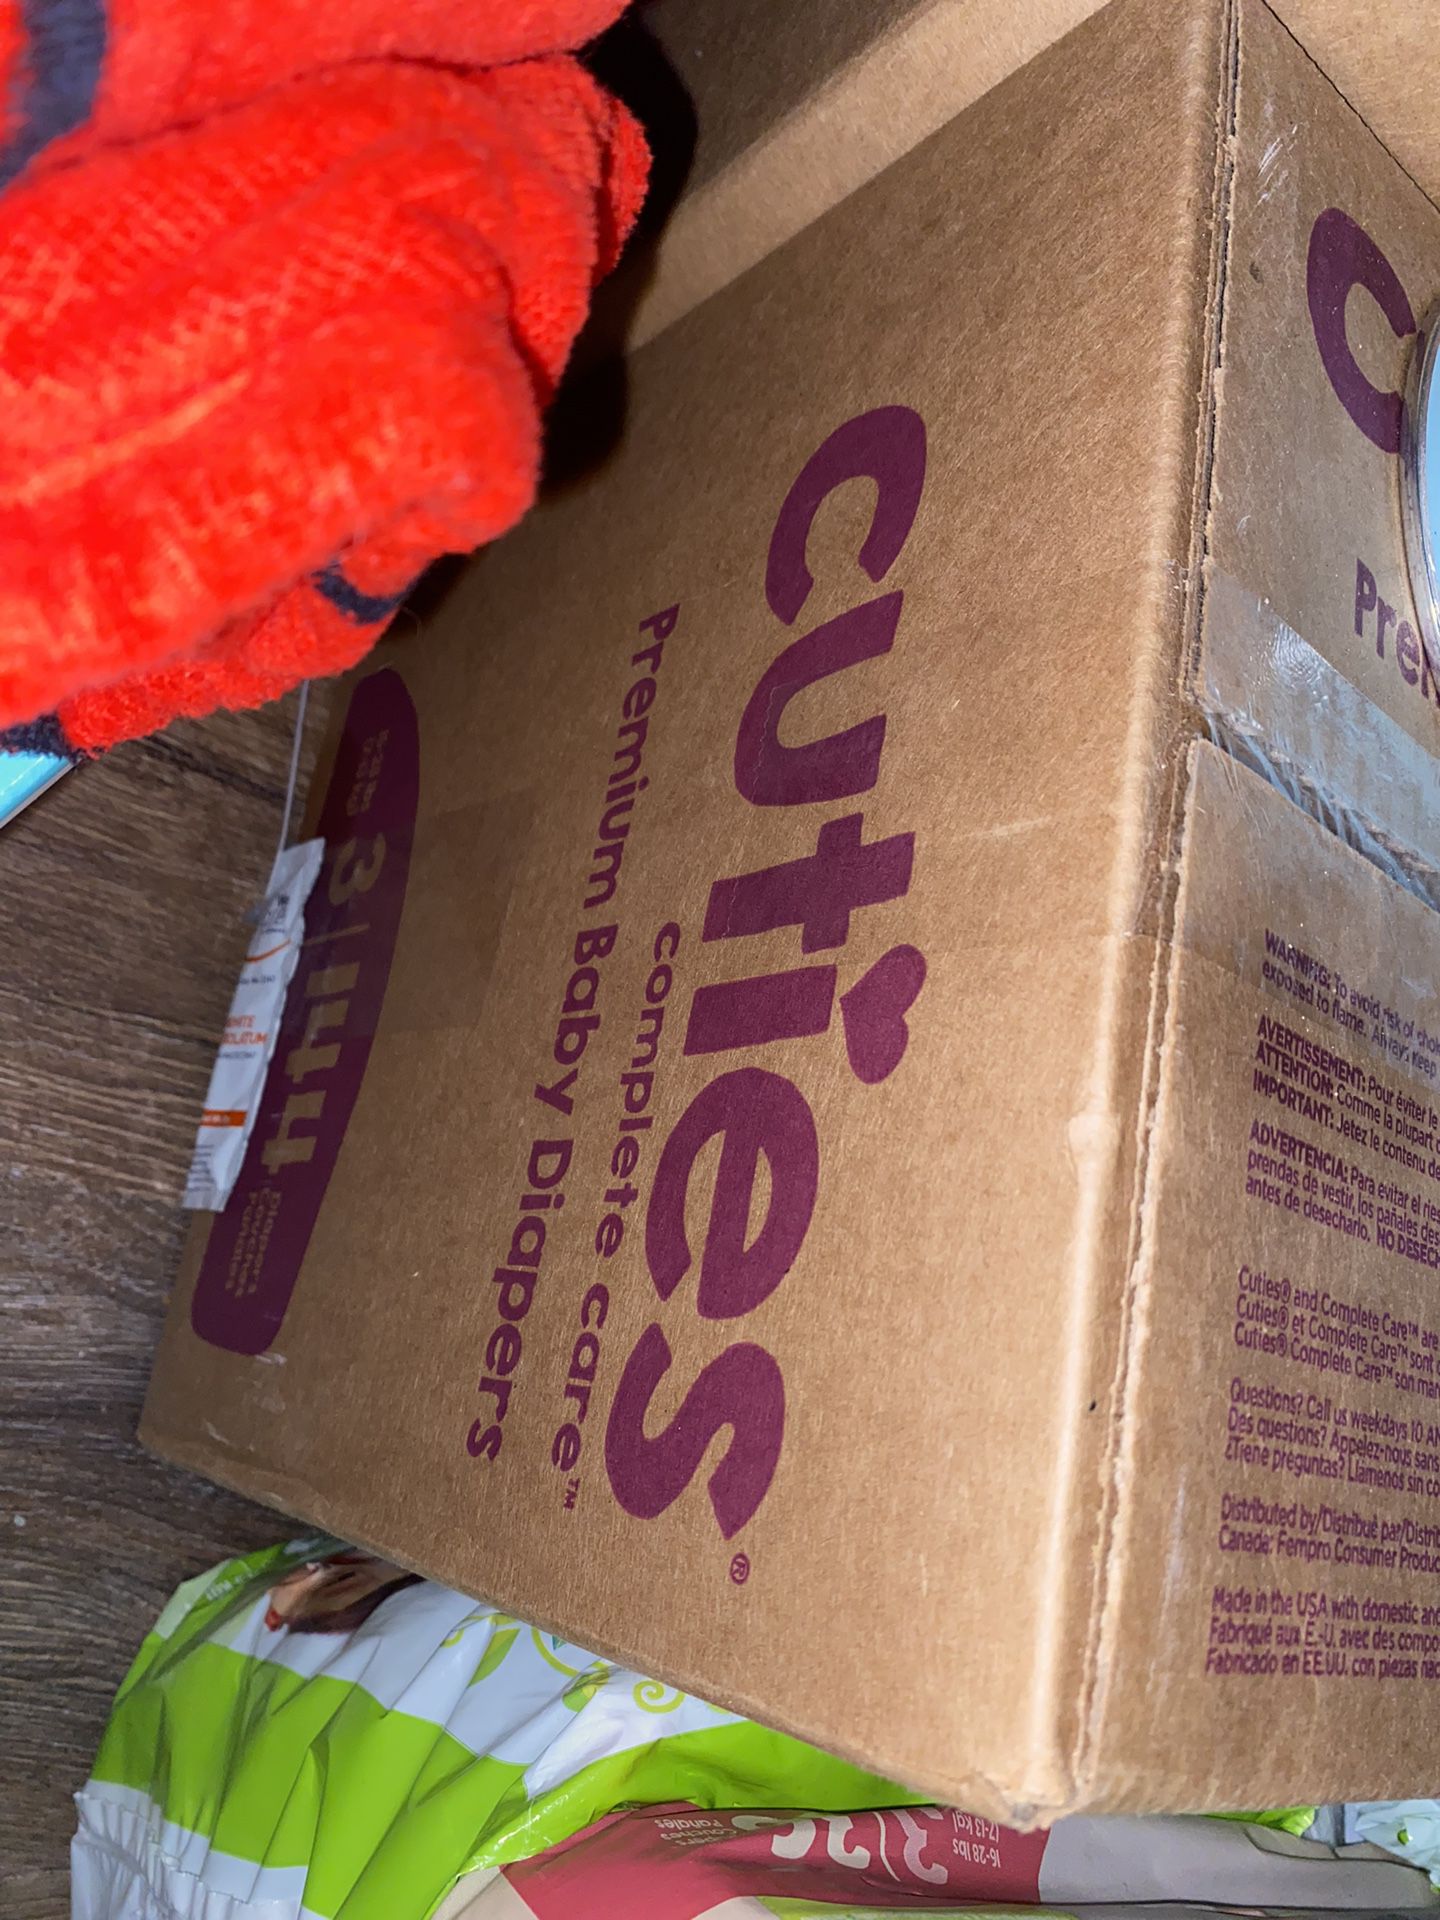 2 Boxes Of #4 Cuties Diapers